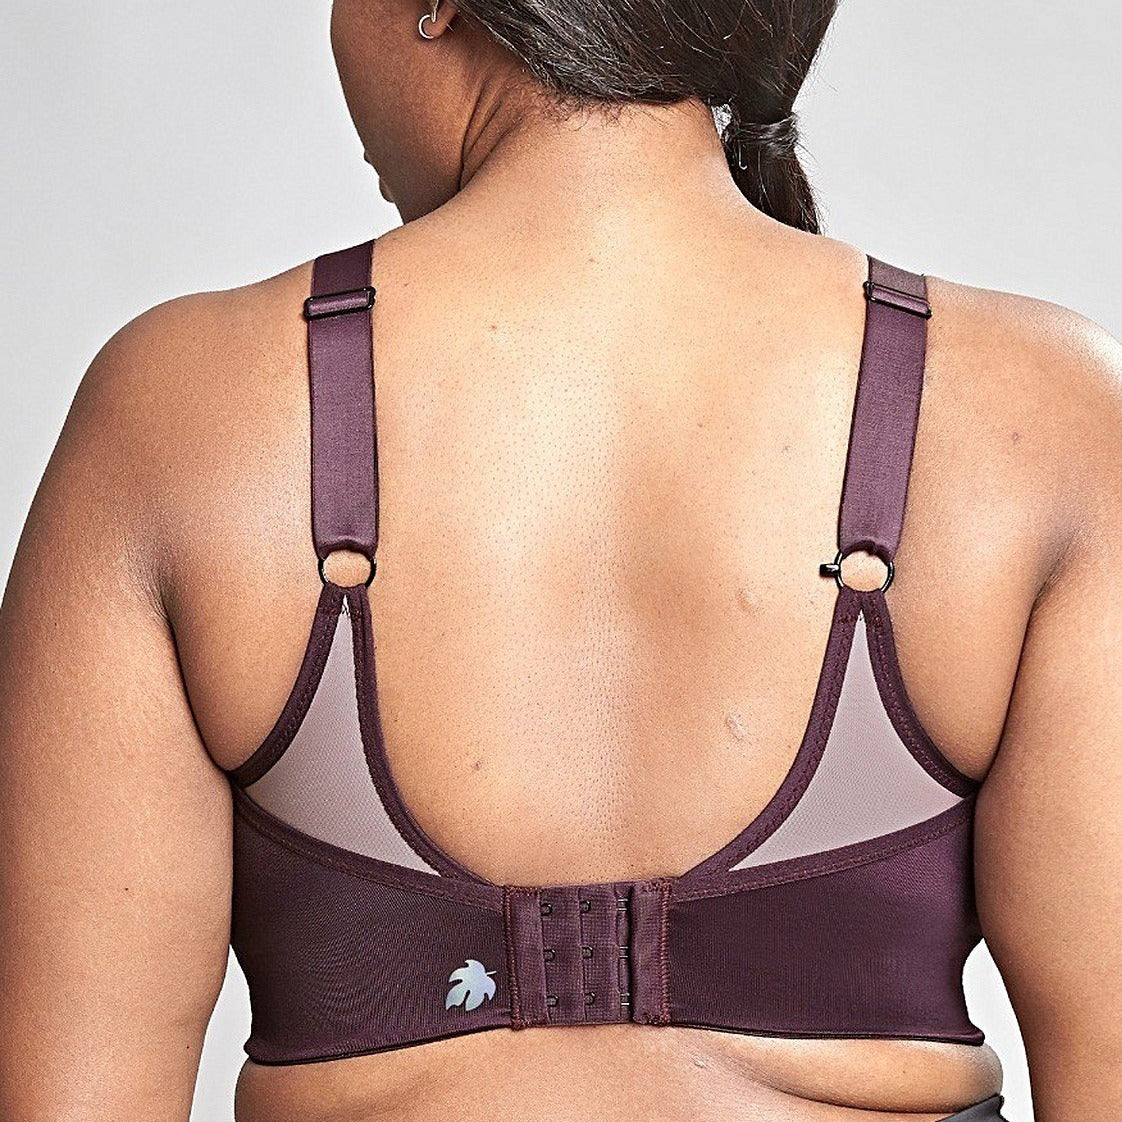 SportsBra Ltd - The Royce Aerocool - our favourite high impact sports bra  with a higher front to prevent boob spillage! ( • )( • ) ( 。 ㅅ 。) (o)(o)  (.)(.)